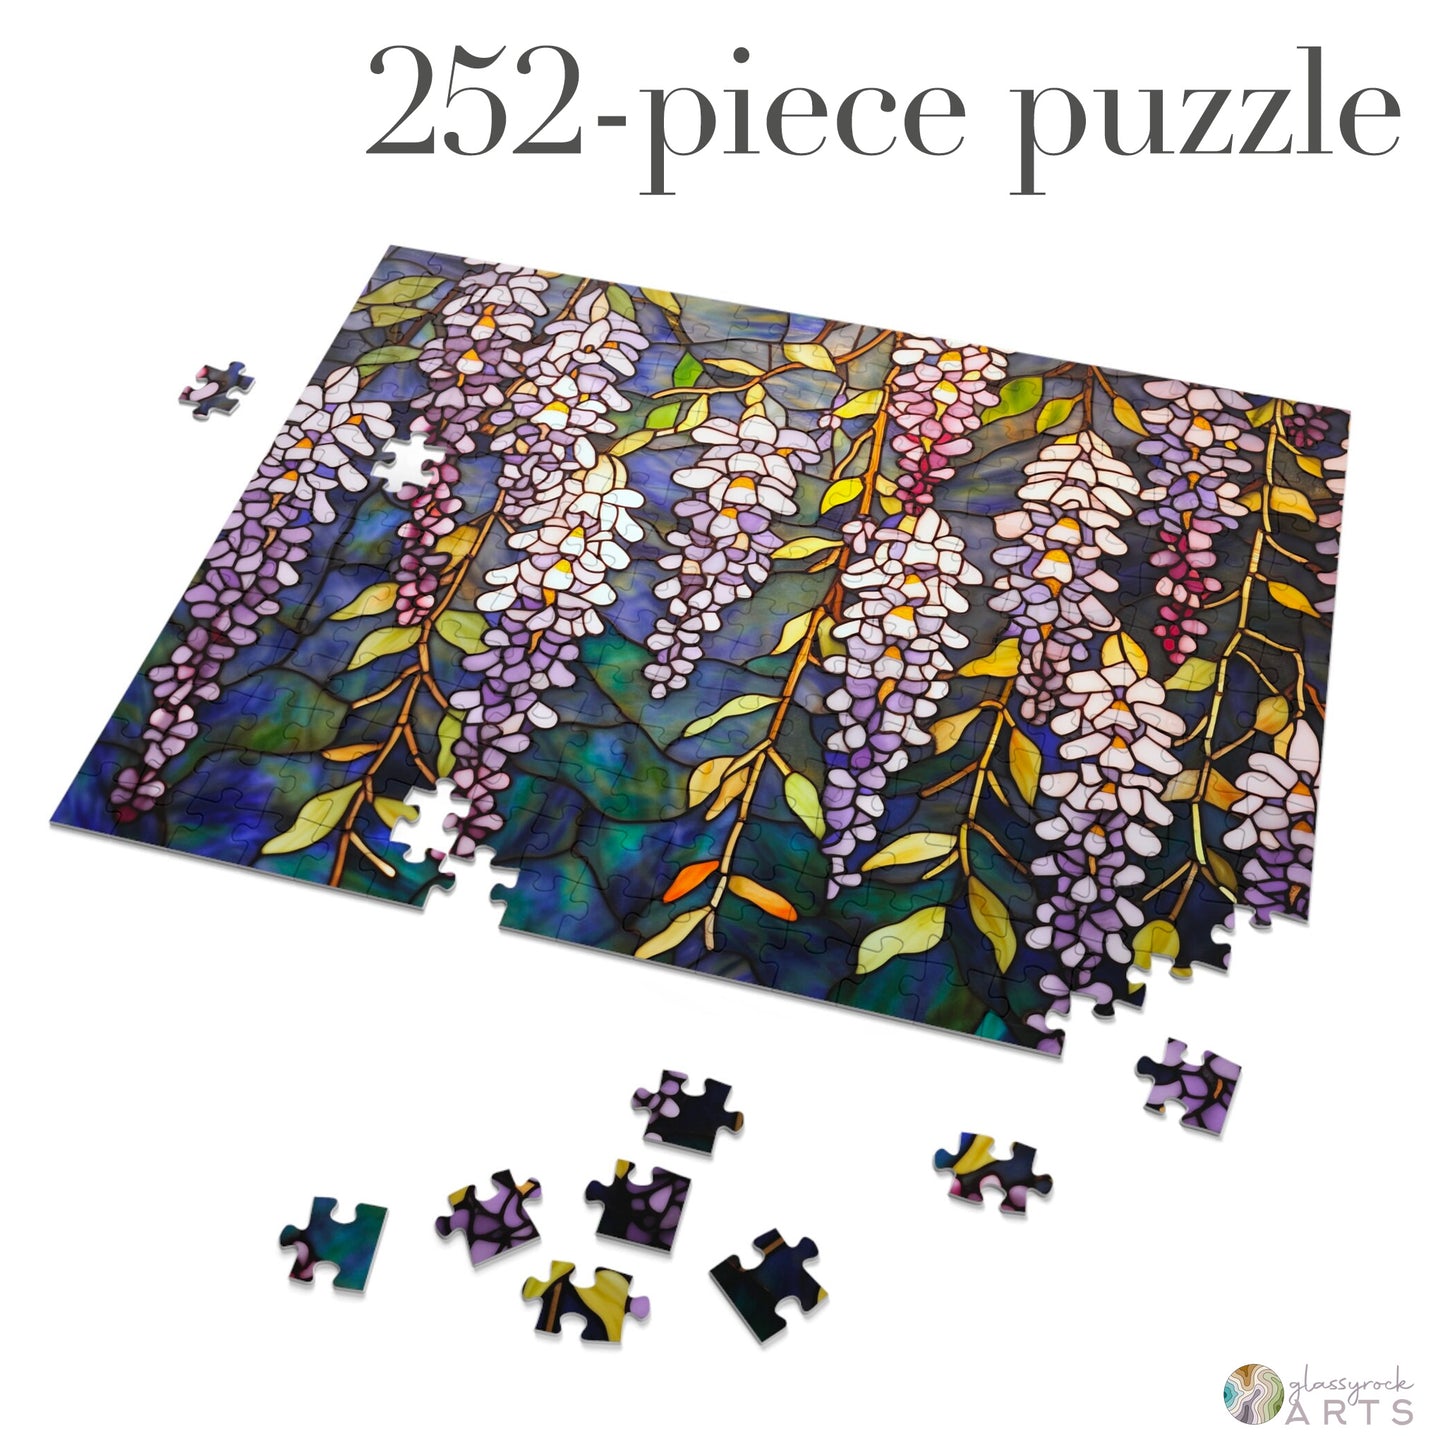 Stained Glass Wisteria Flowers Jigsaw Puzzle